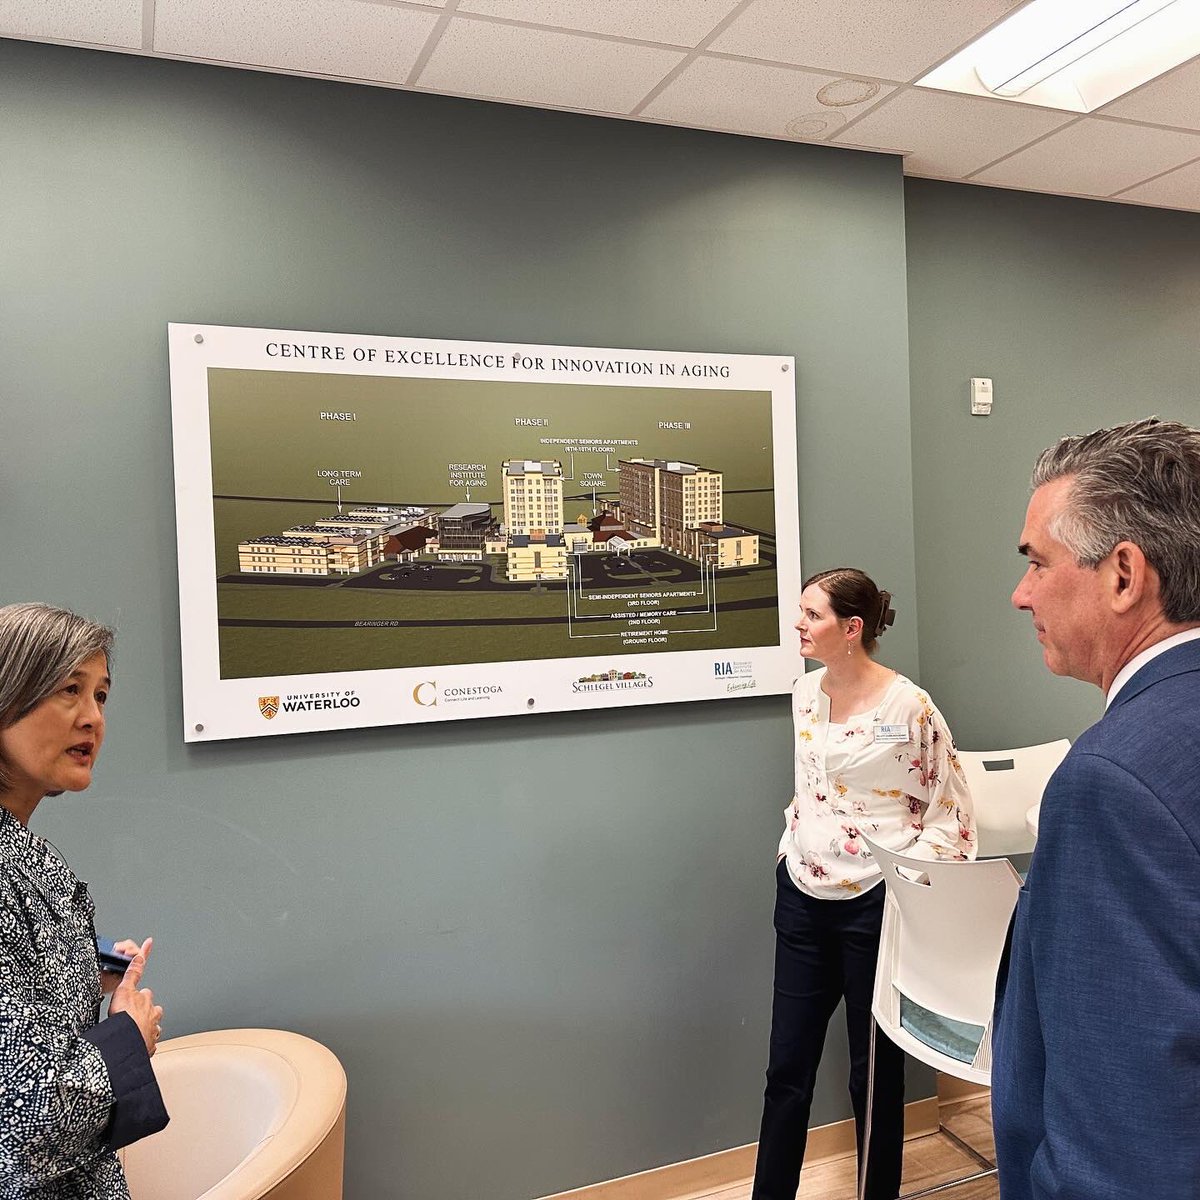 The challenges and opportunities that come with aging are complex. @SchlegelUW_RIA understands this well. I had the opportunity to visit their space and learn more about the important work they do. Thanks for the warm welcome!